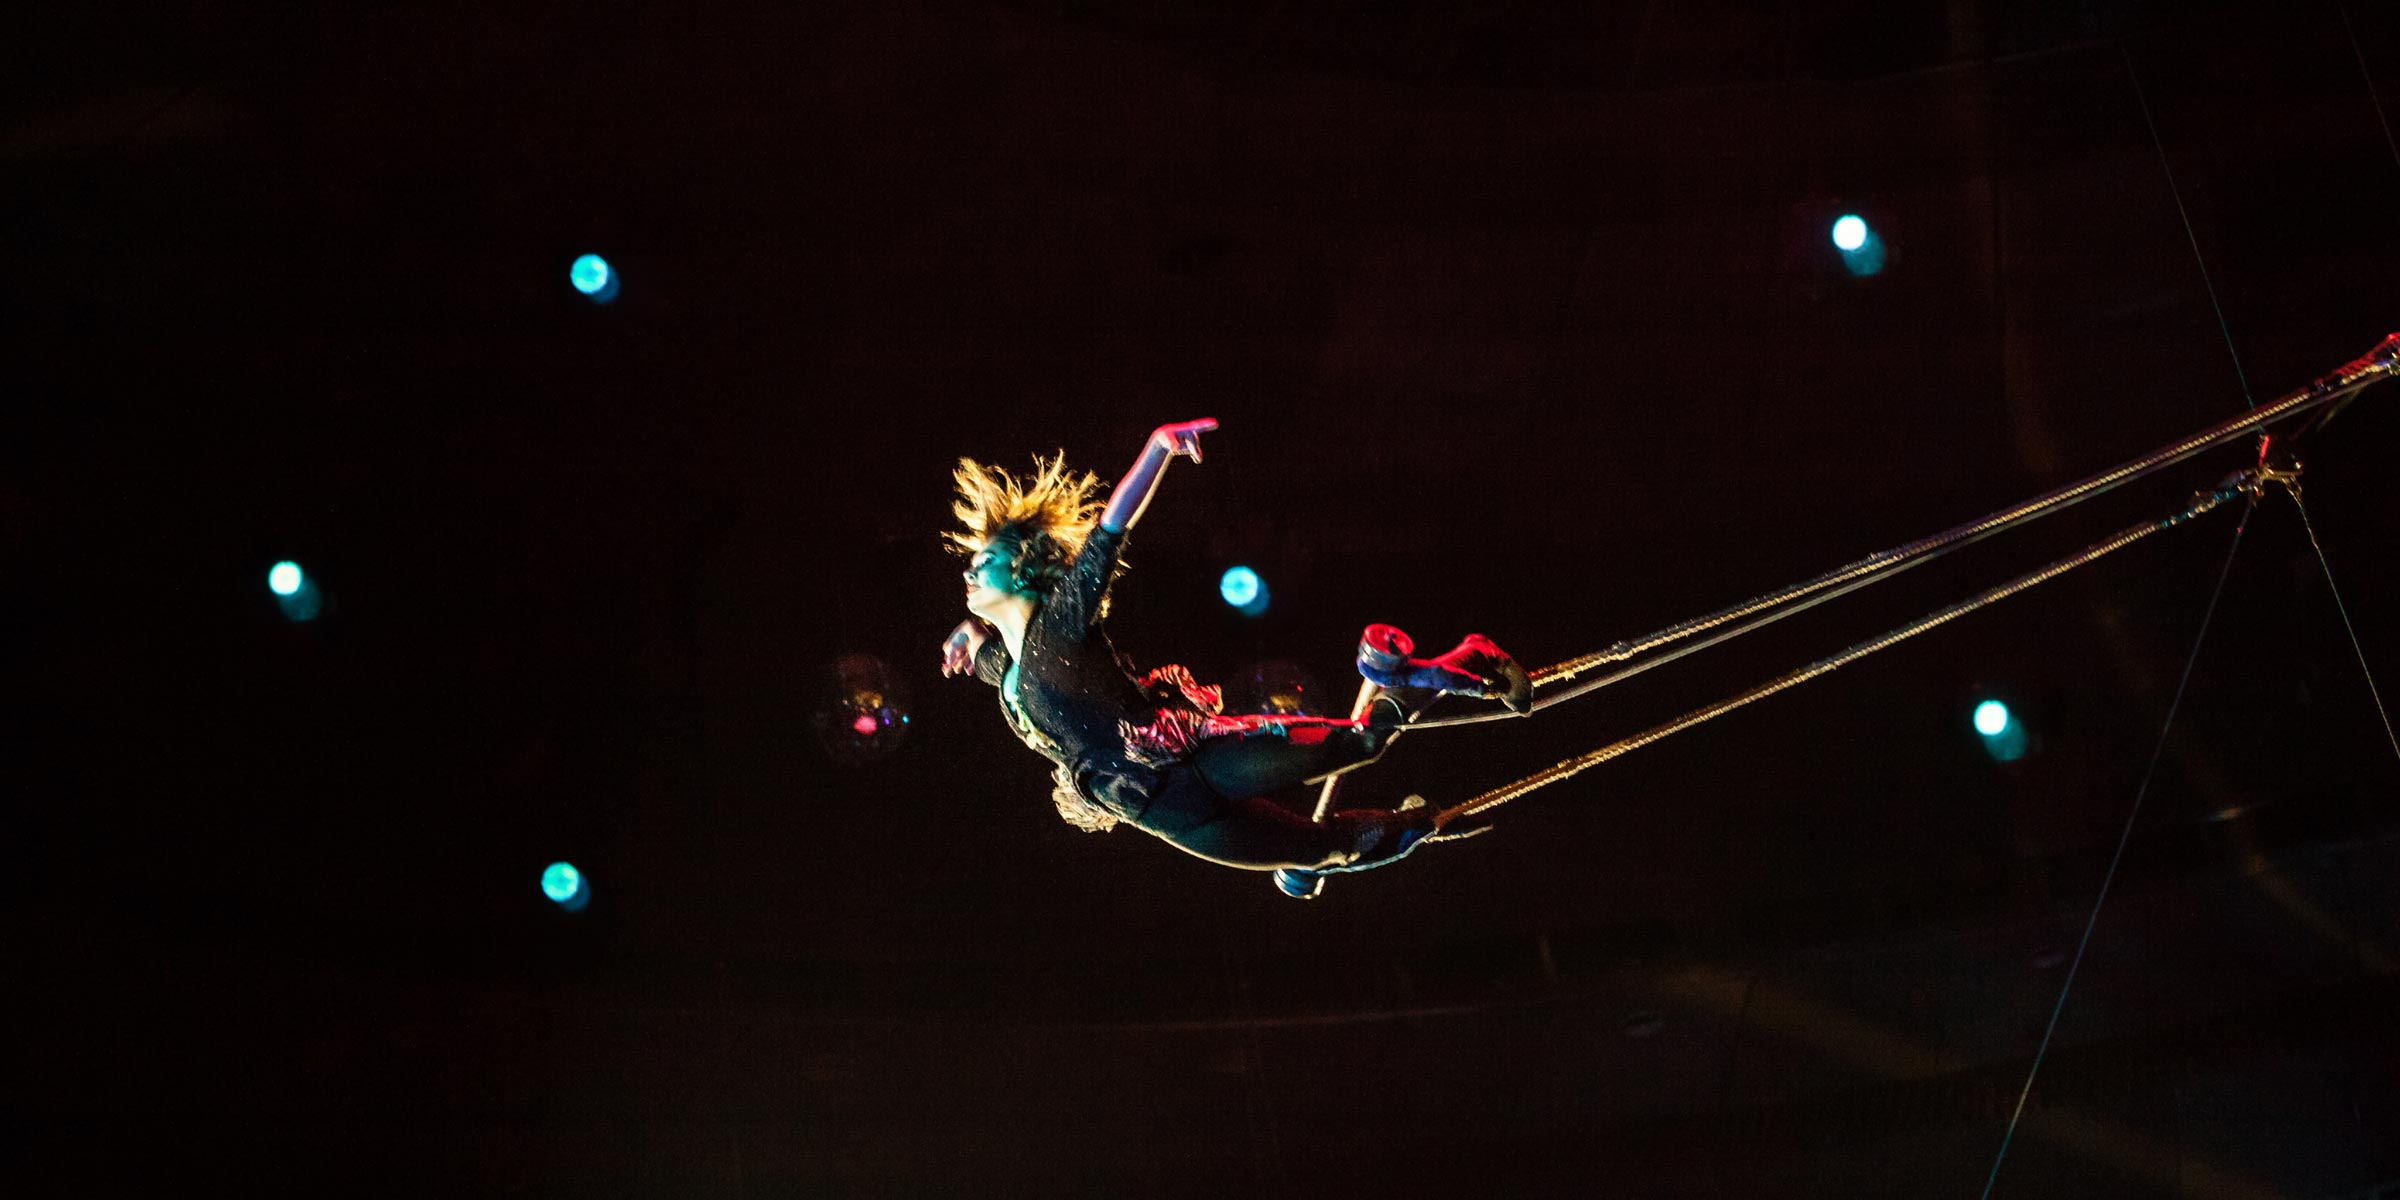 Trapeze artist flying through the air demonstrating the safety net of the second draft.